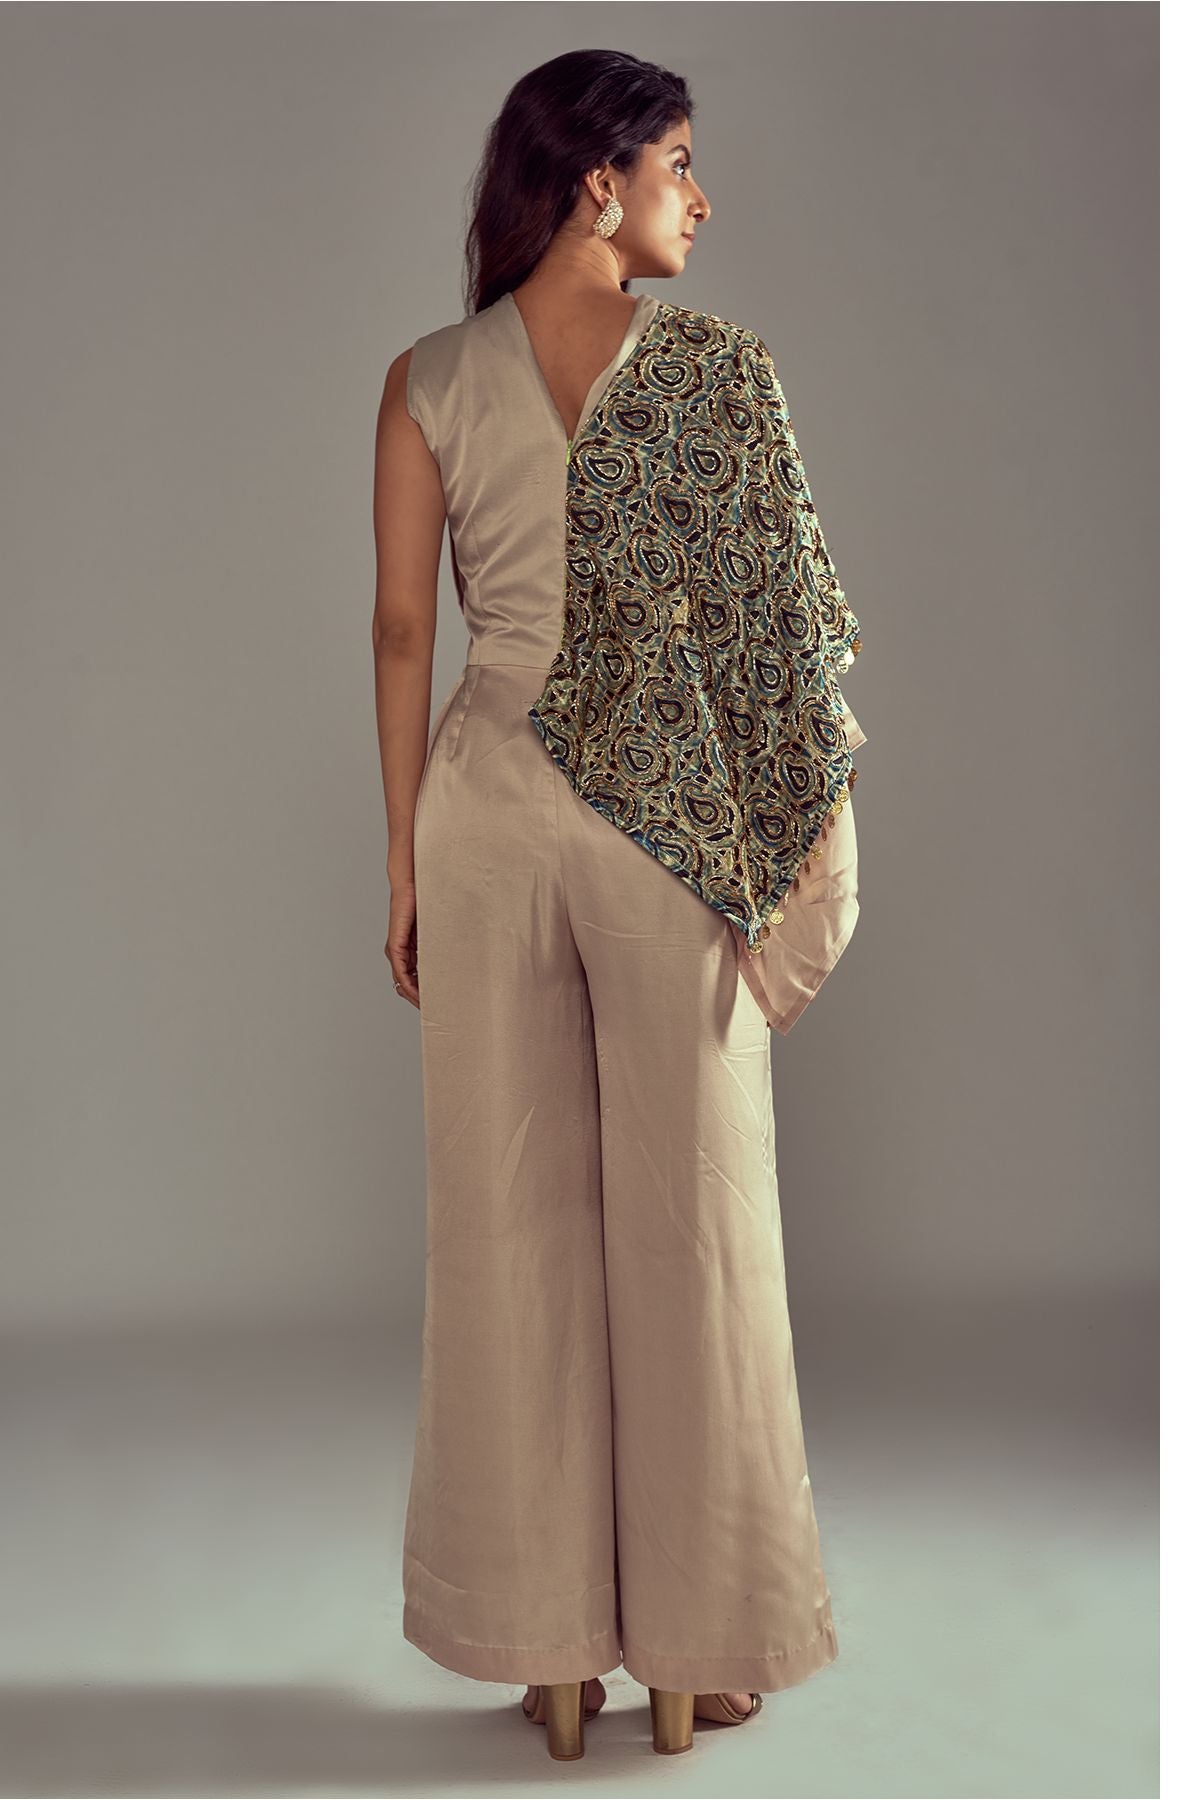 "Stylish Dark Beige Drape Jumpsuit in Pure Satin Crepe, featuring Intricate Detailing on the Flap. Embrace elegance and make a statement in this ensemble!"